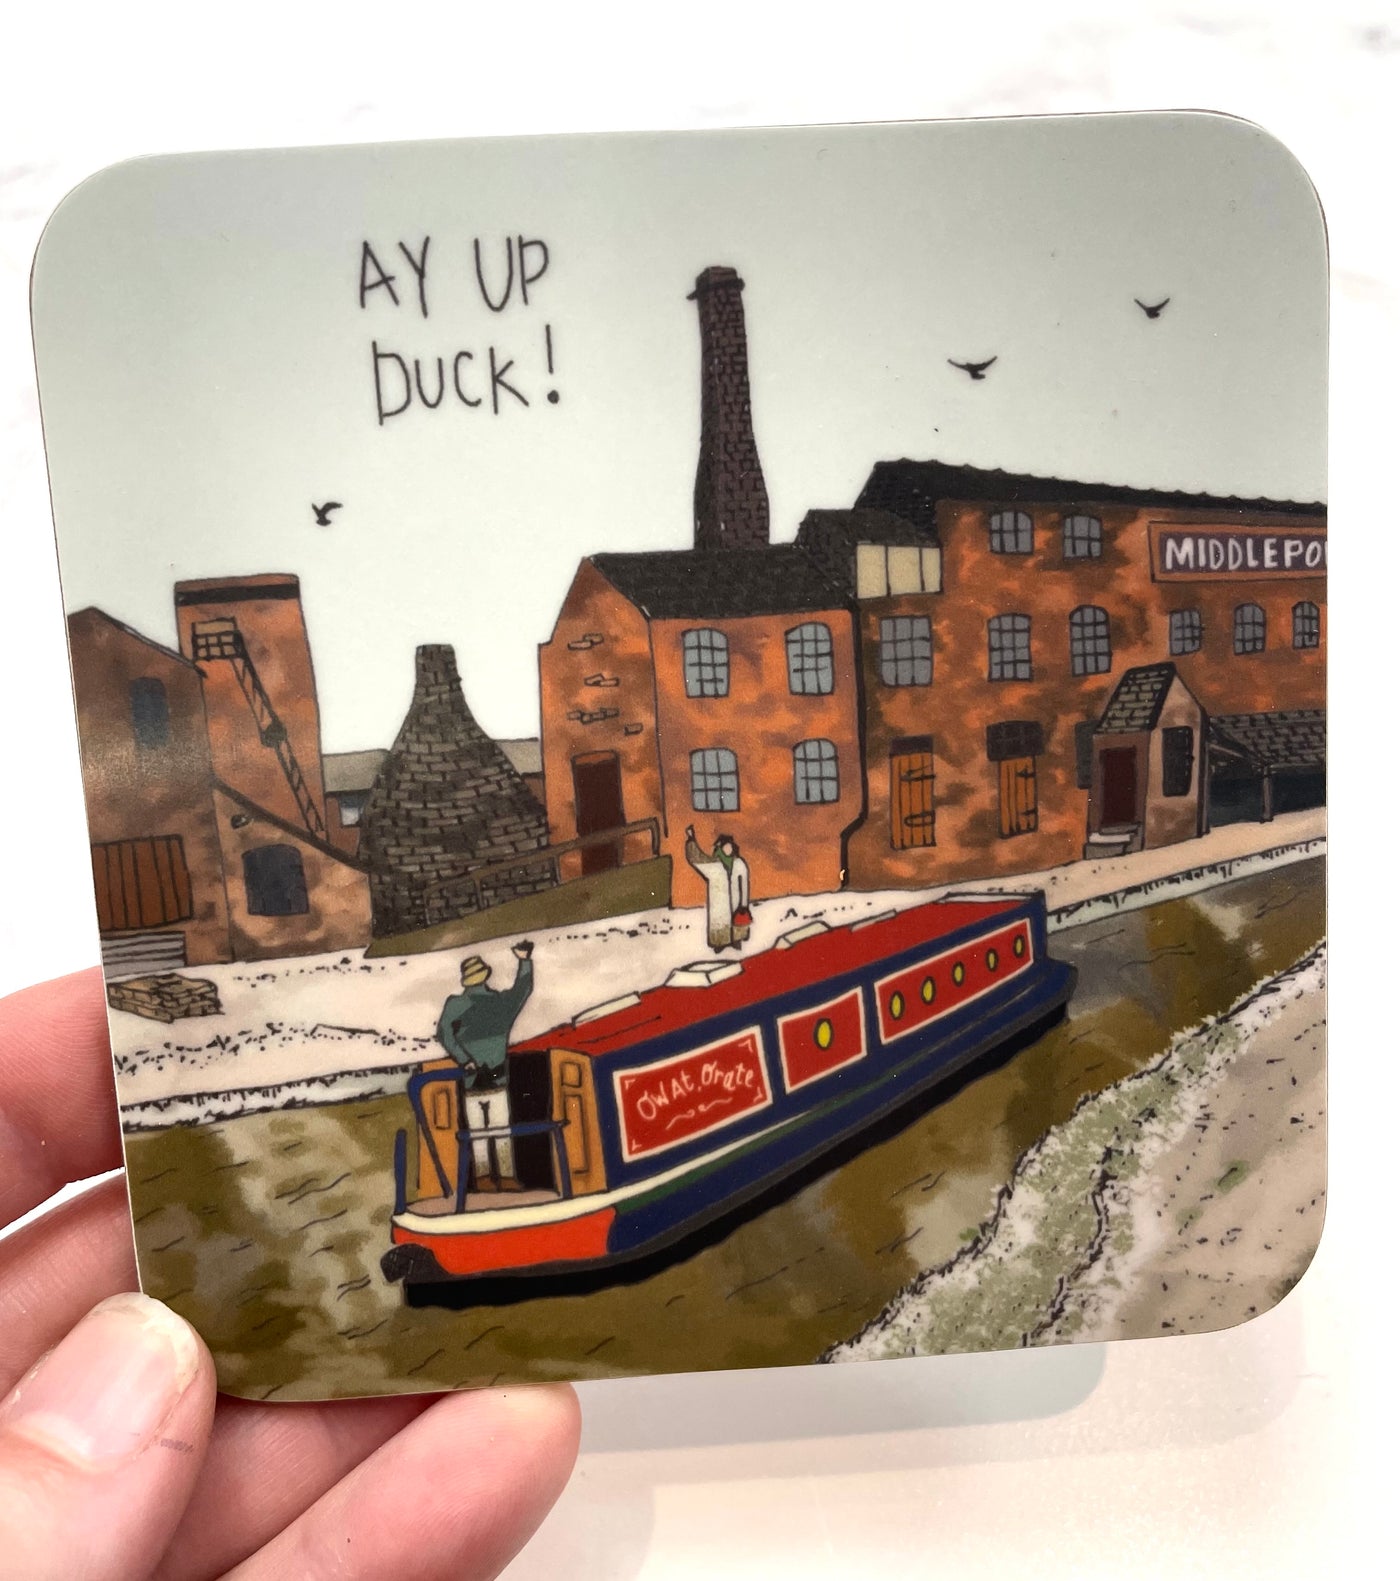 Flying Teaspoon Coaster - Ay up Duck - Middleport Pottery Canal